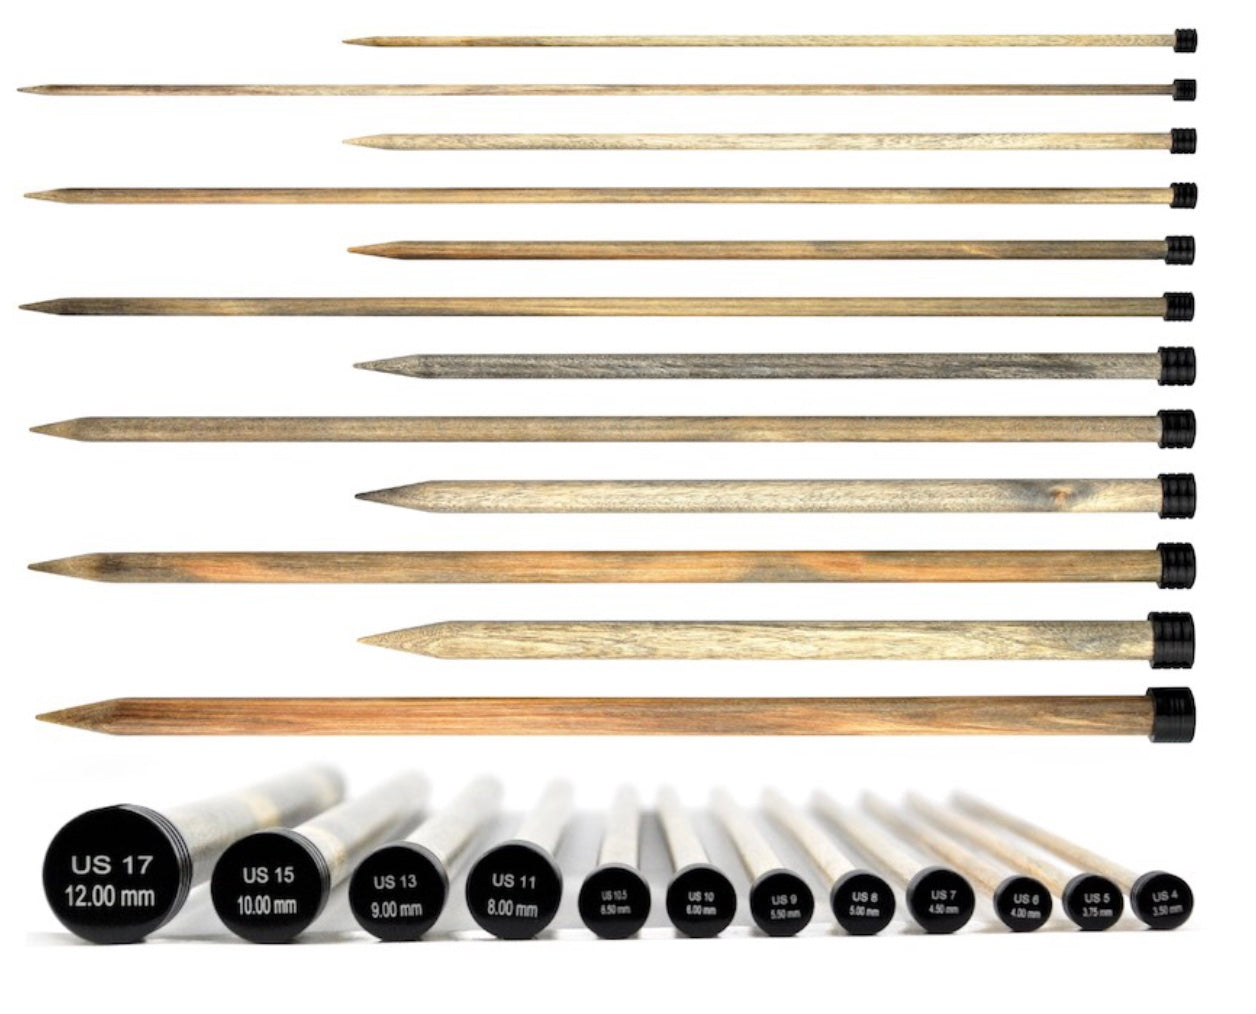 knitting needles in different sizes